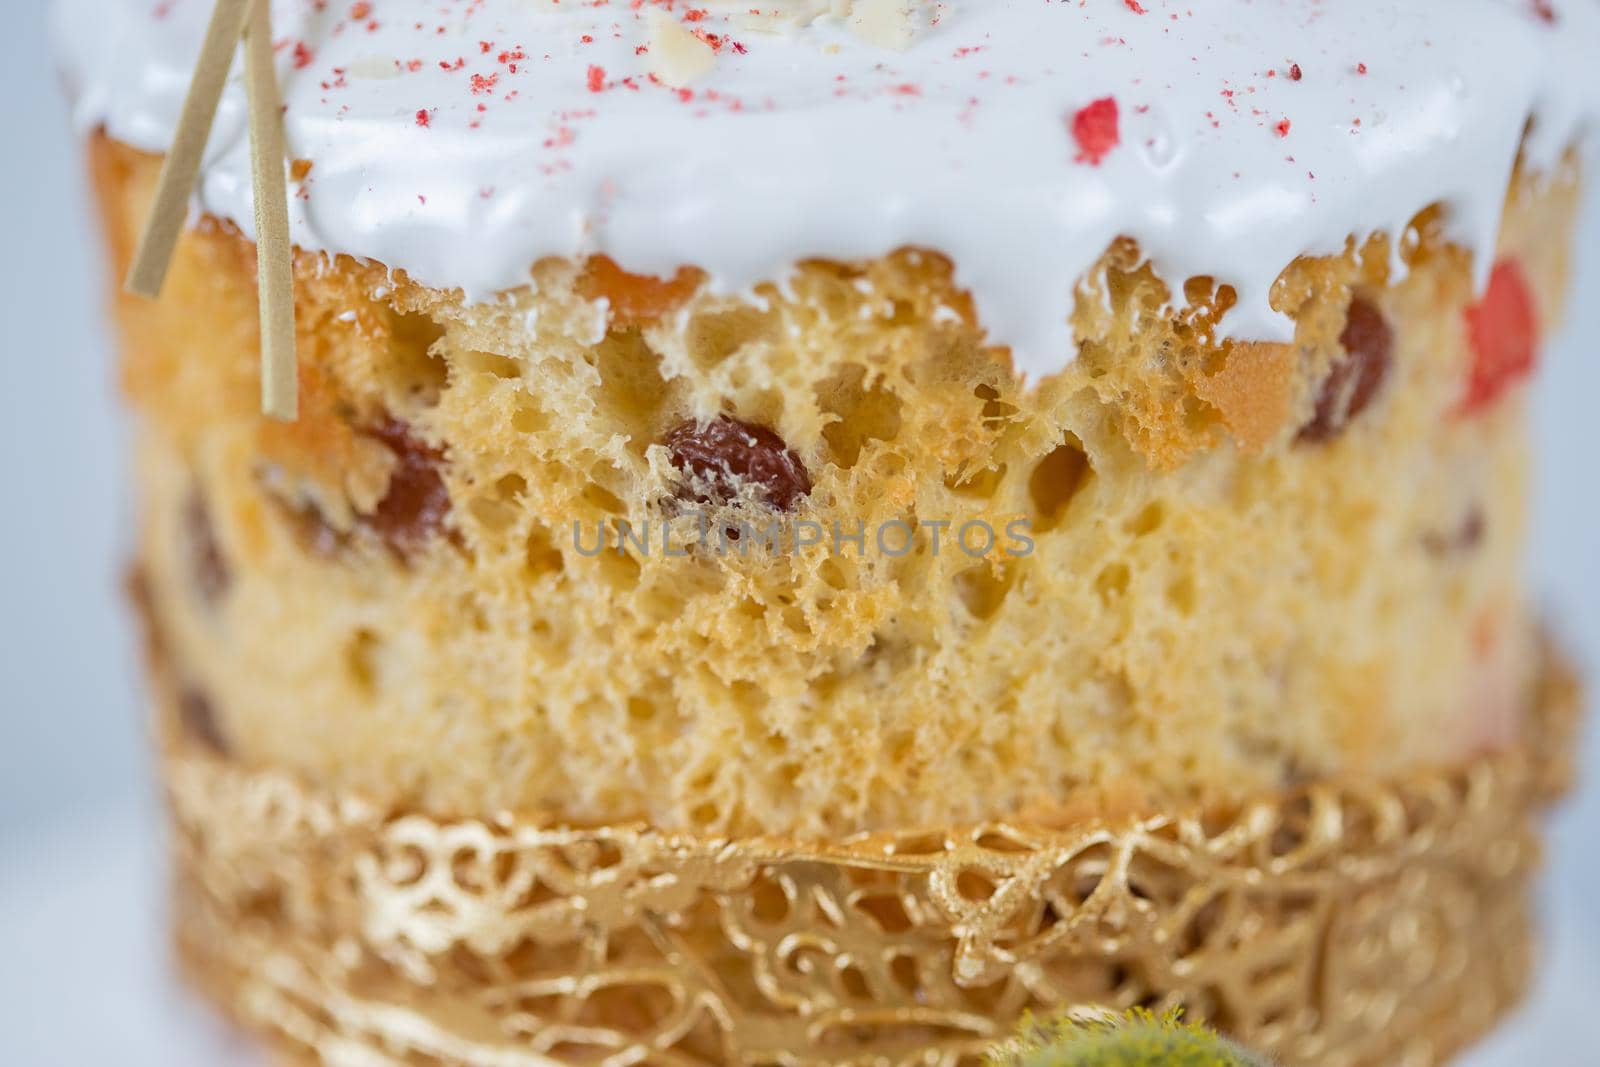 Close-up of an Easter cake. The porous surface of the cake made from yeast dough on a white background